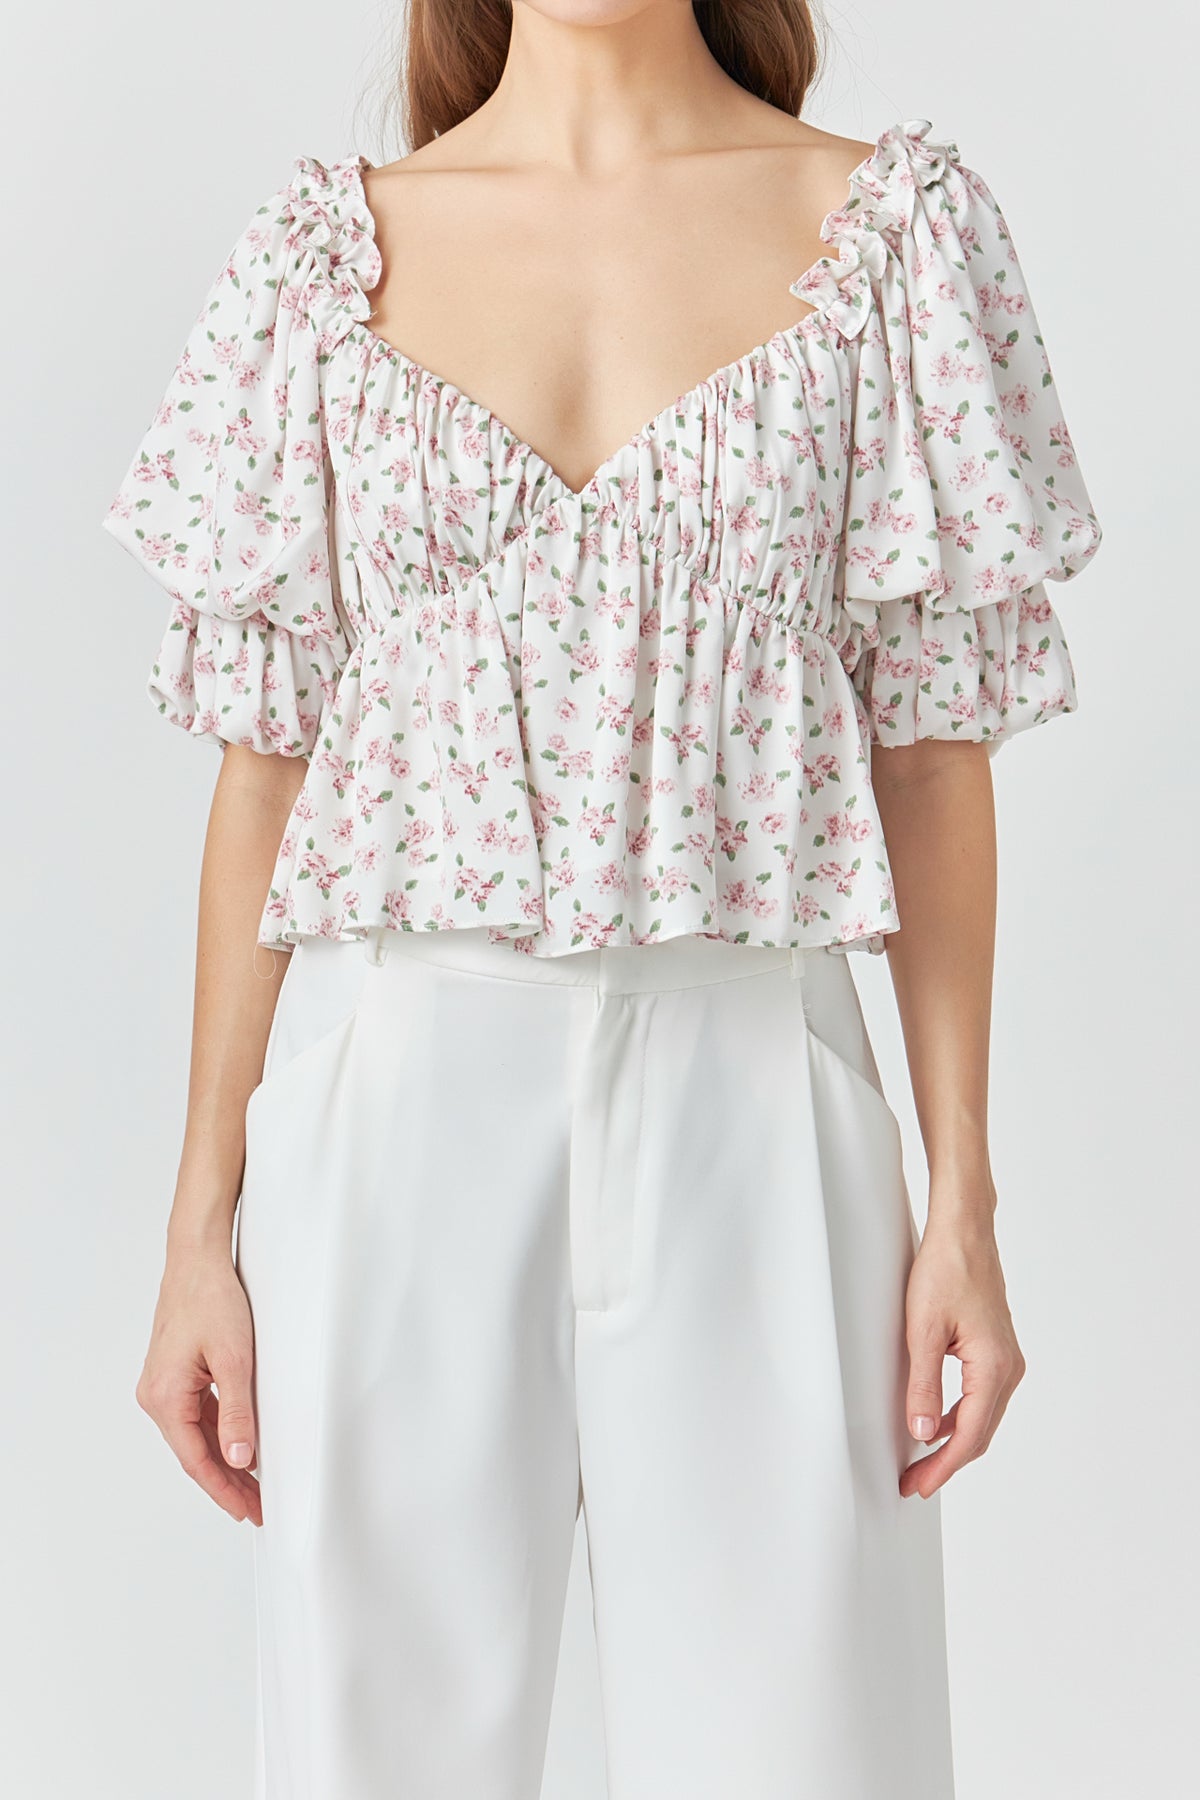 ENDLESS ROSE - Floral Print Satin Top - TOPS available at Objectrare